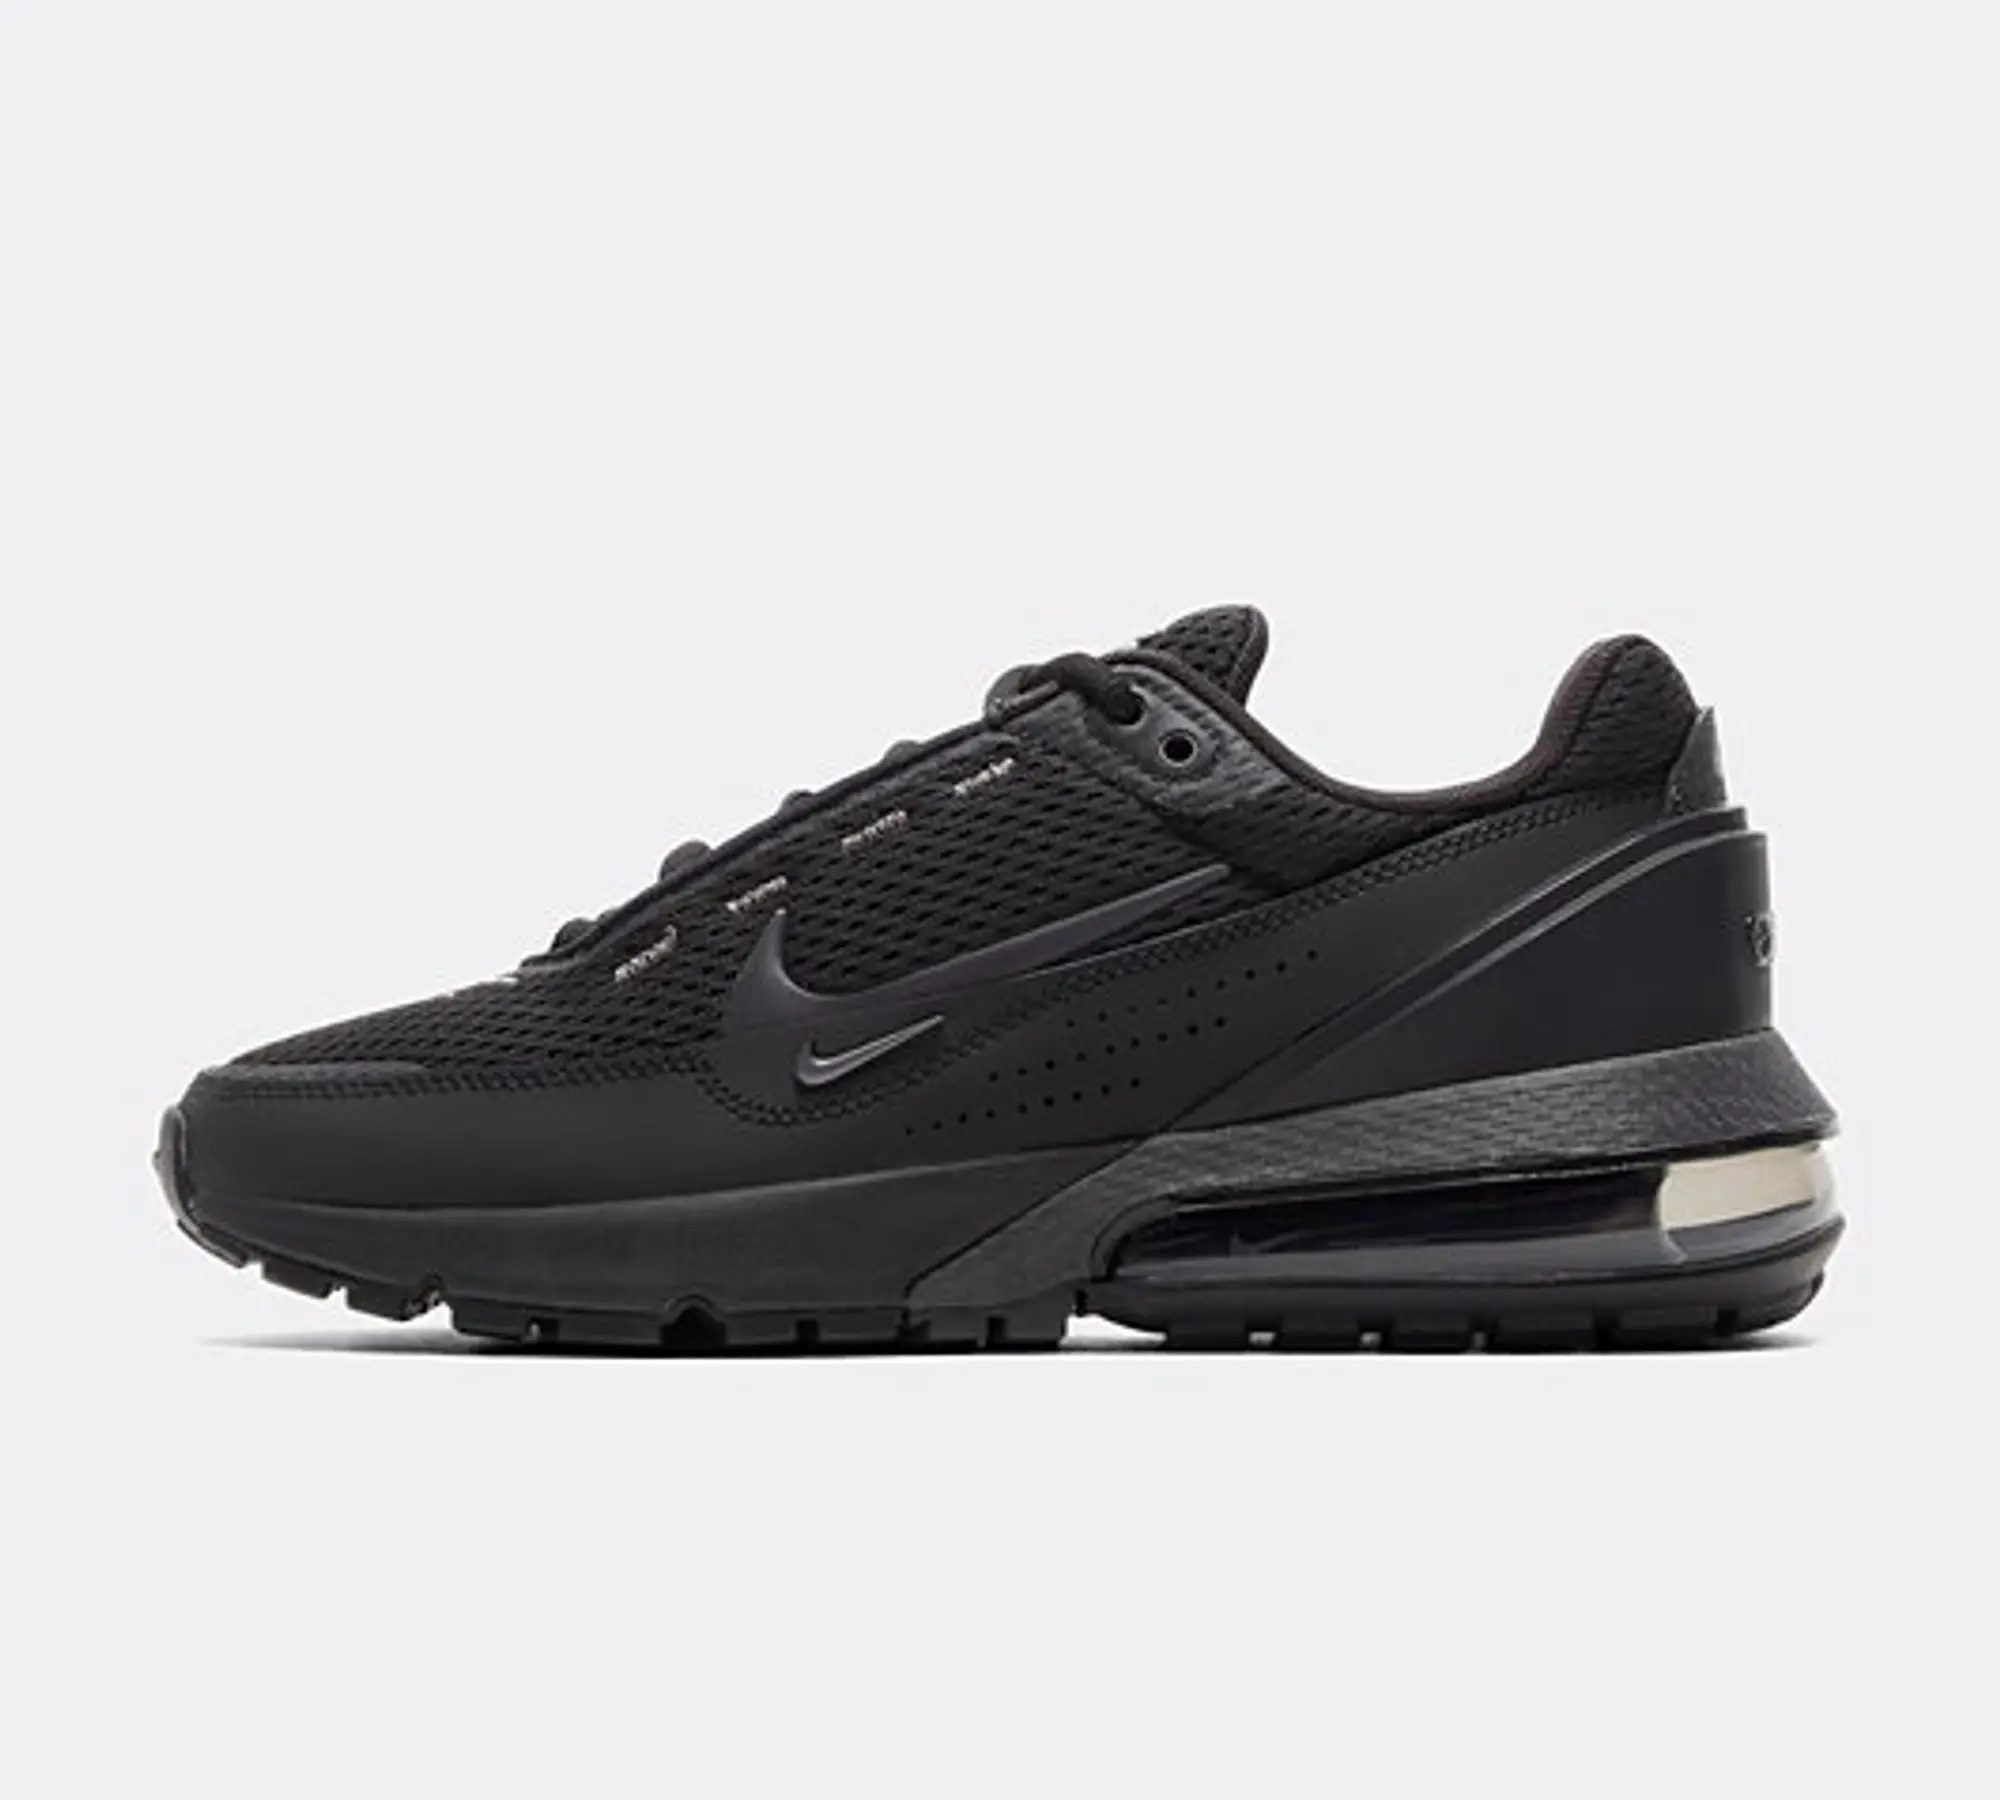 Nike Womens Air Max Pulse Trainer - Black / Anthracite / Particle Grey